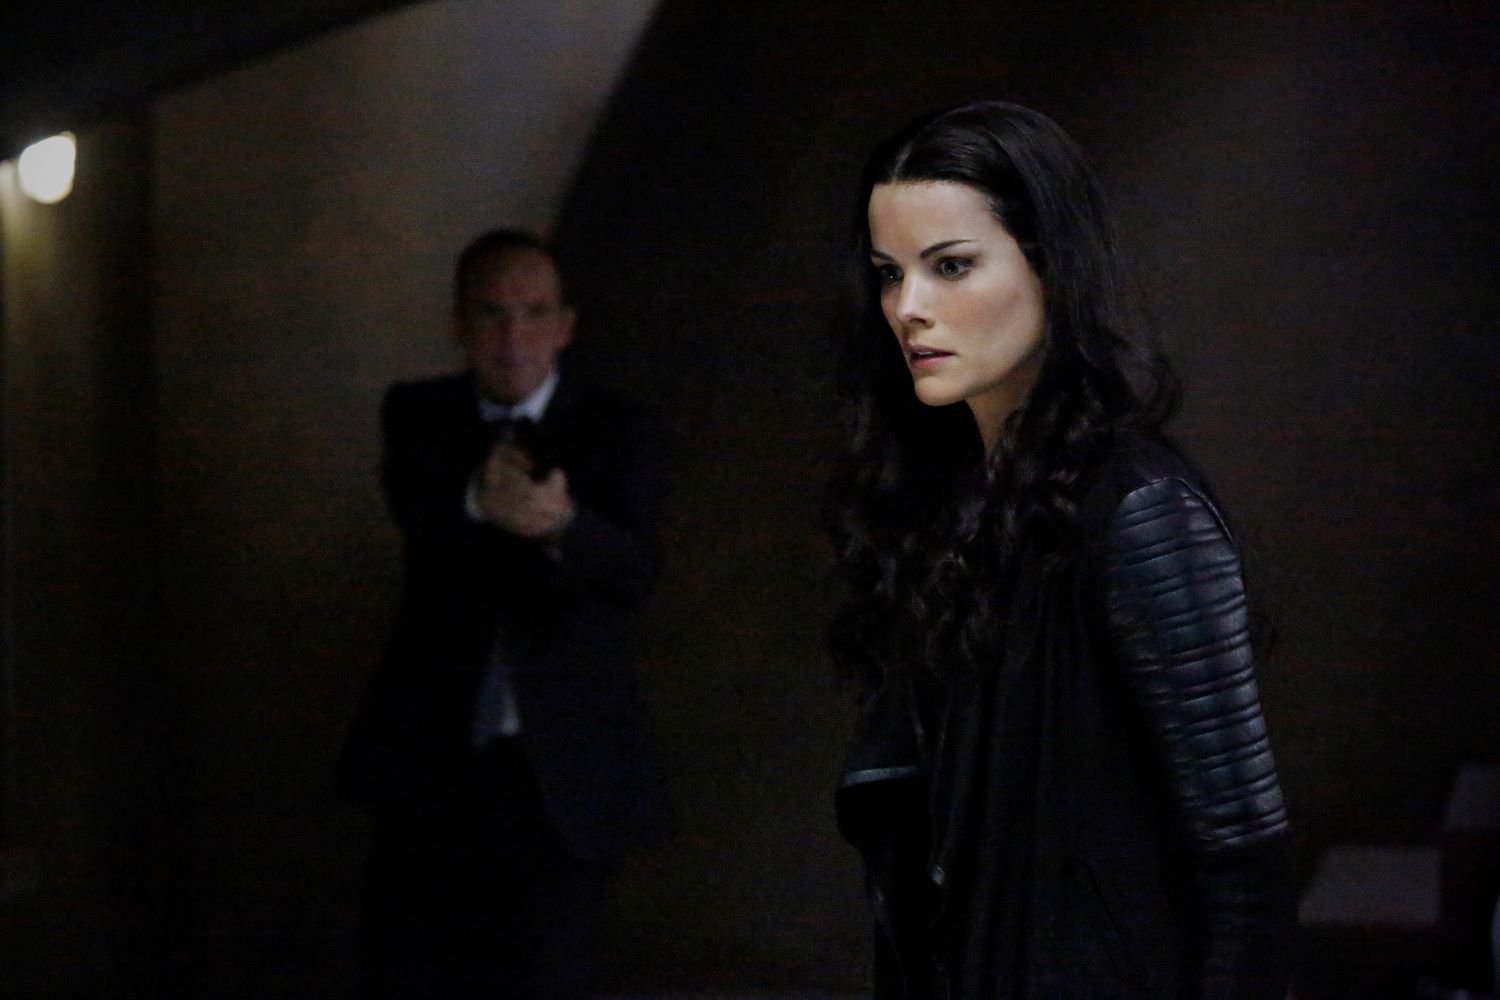 'Loki' star Jamie Alexander as Lady Sif in 'Agents of S.H.I.E.L.D.